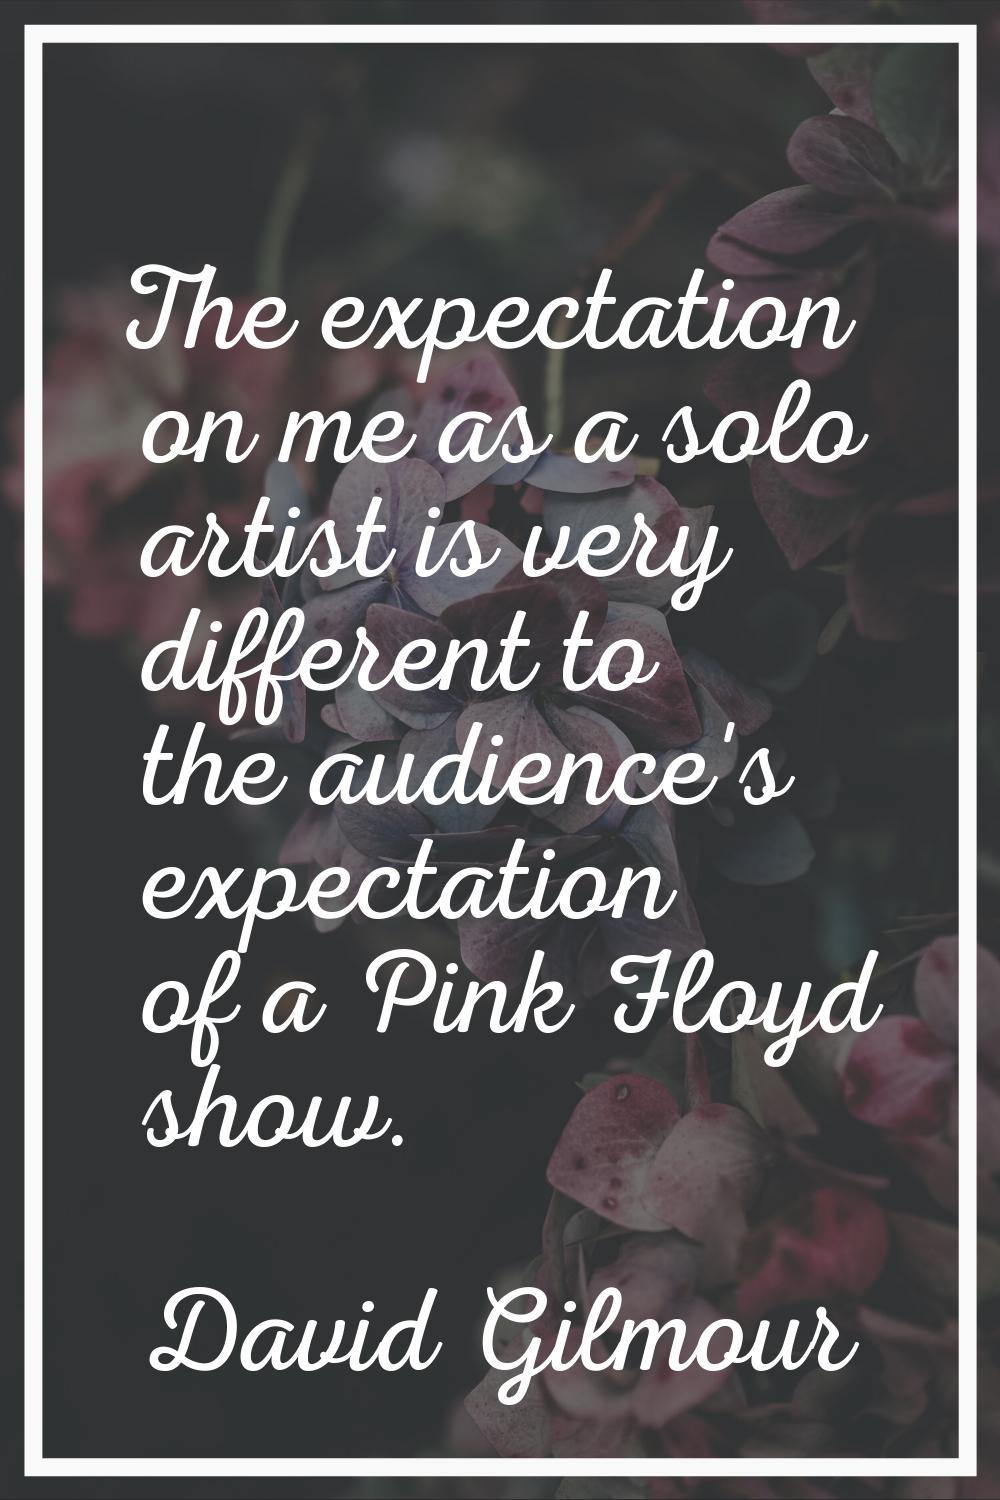 The expectation on me as a solo artist is very different to the audience's expectation of a Pink Fl